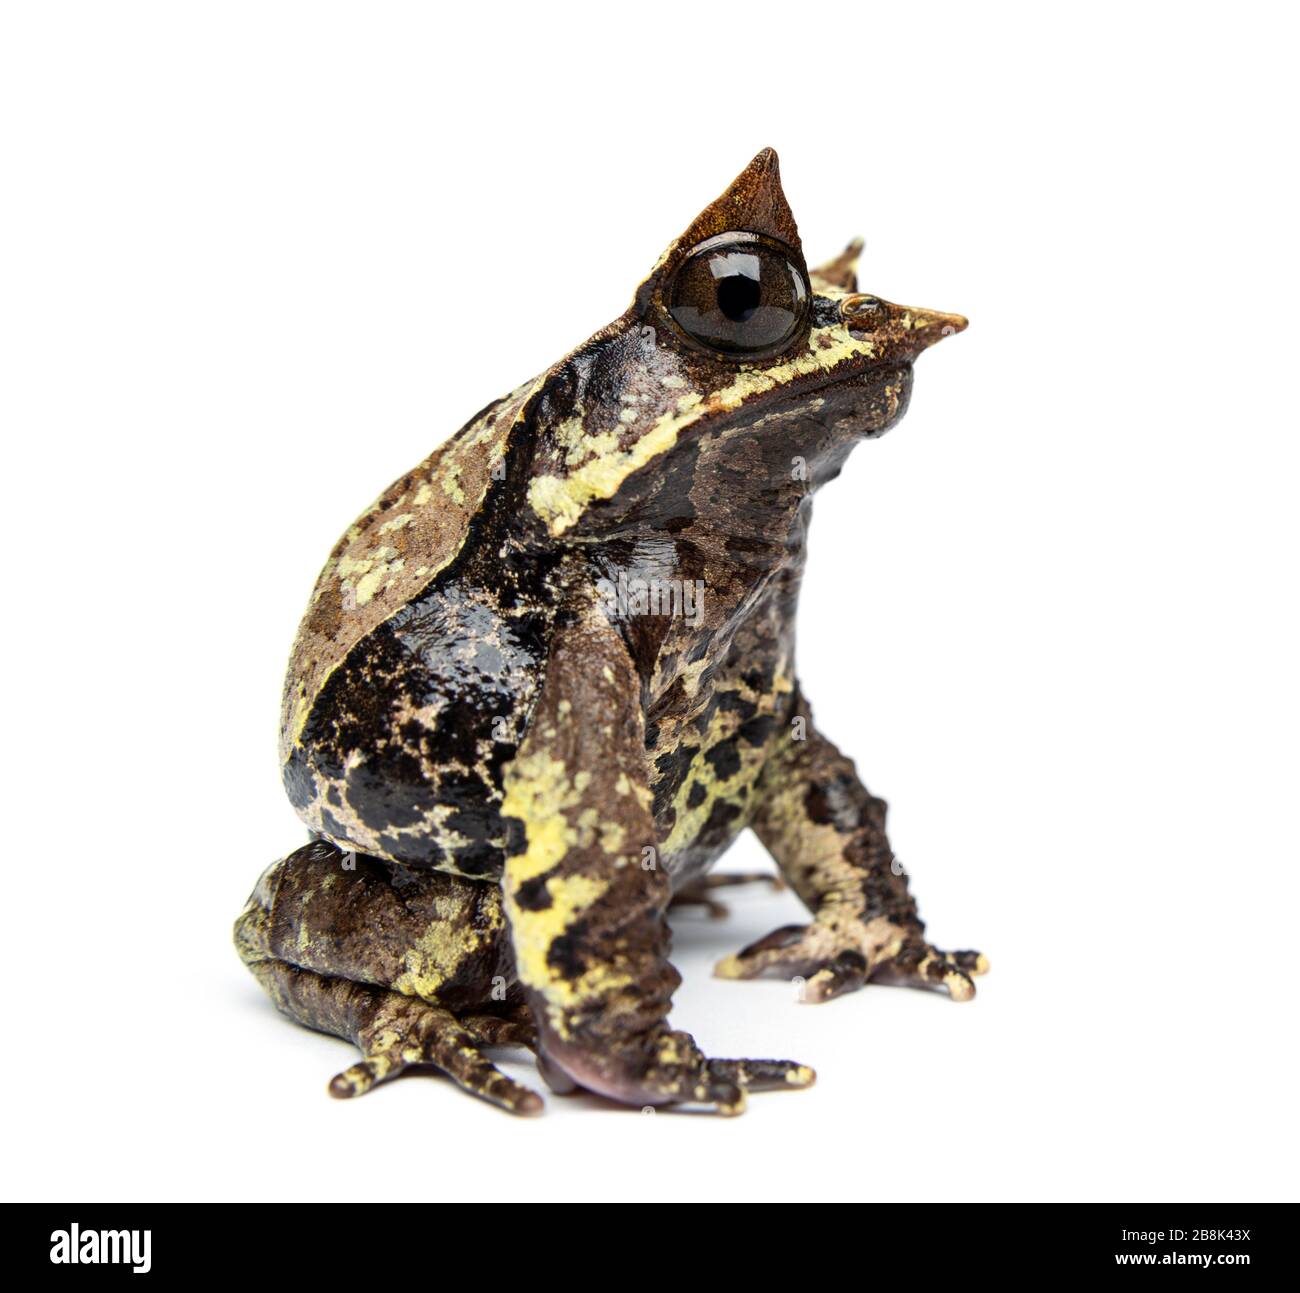 Side view of a Long-nosed horned frog looking at the camera, Megophrys nasuta, isolated Stock Photo